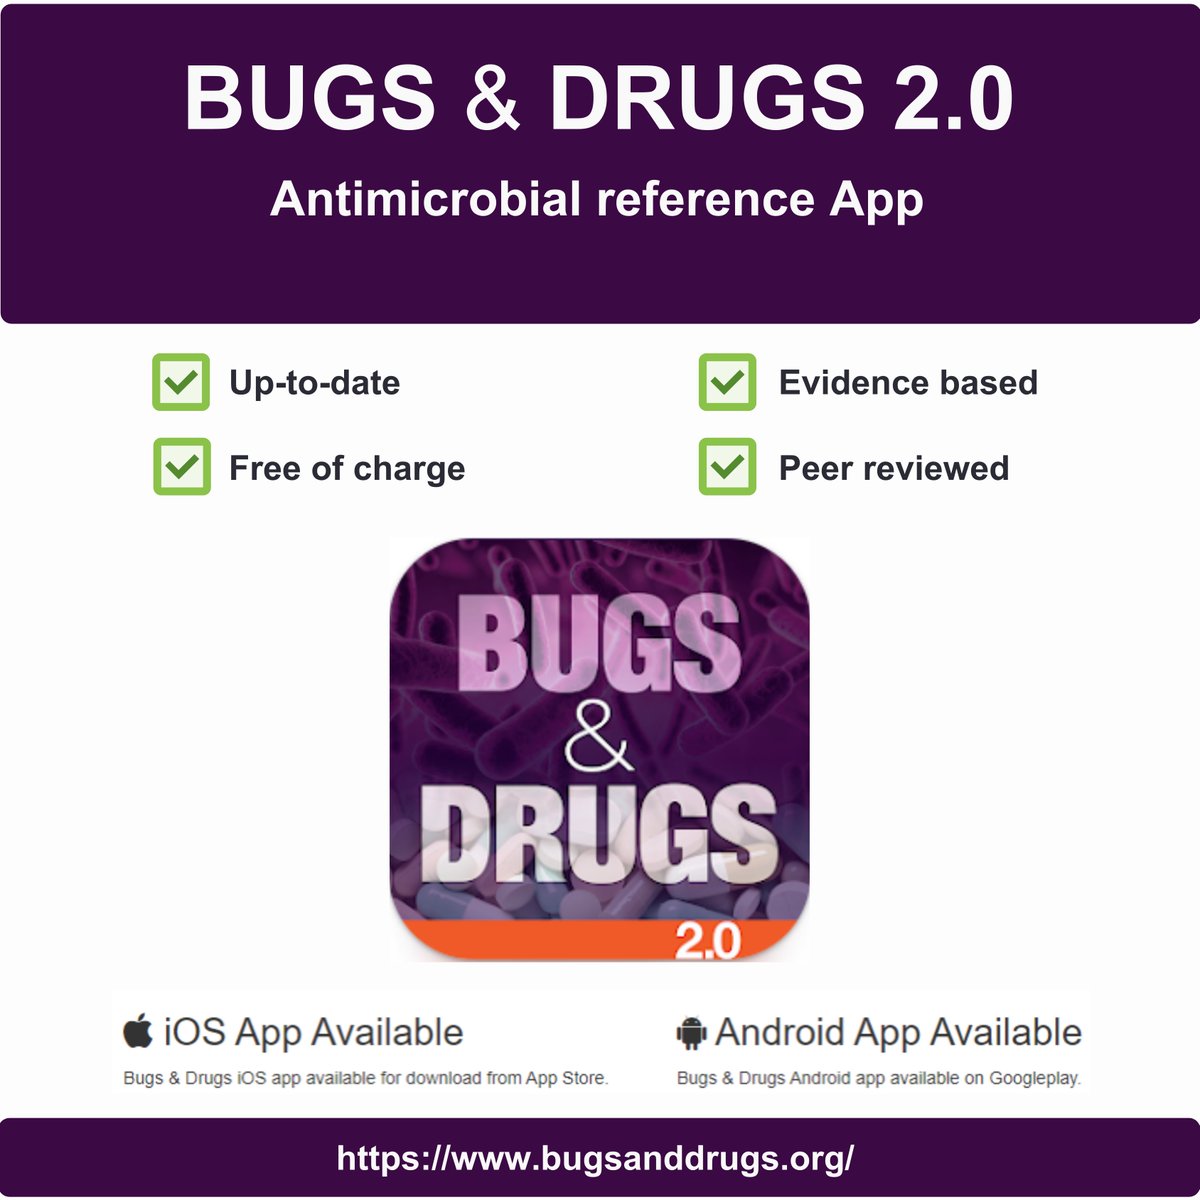 Have you downloaded our updated app? Get Bugs and Drugs 2.0 from your app store